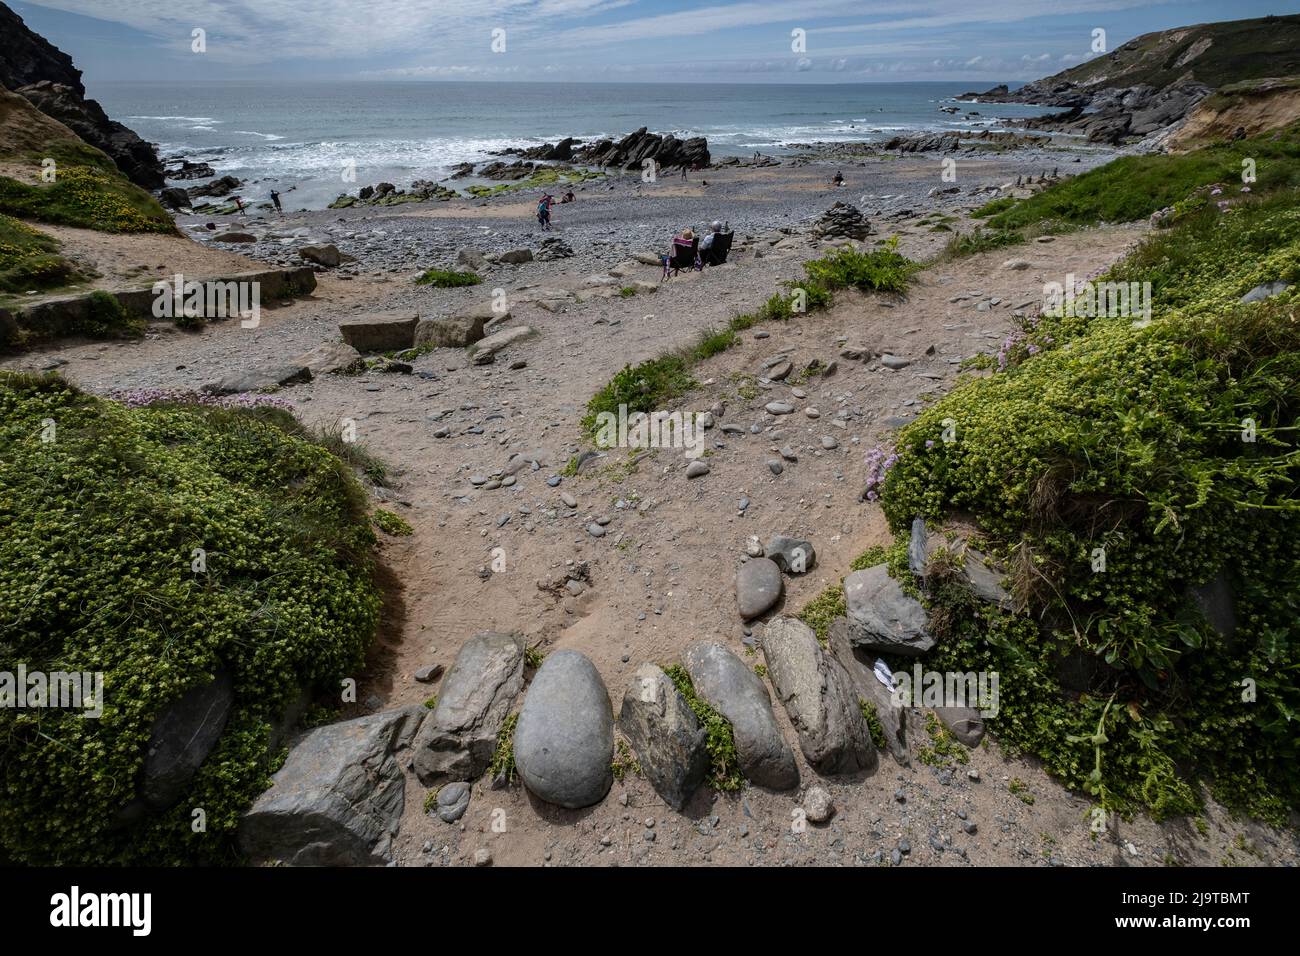 The rocky beach of Dollar Cove in Cornwall, England. Stock Photo